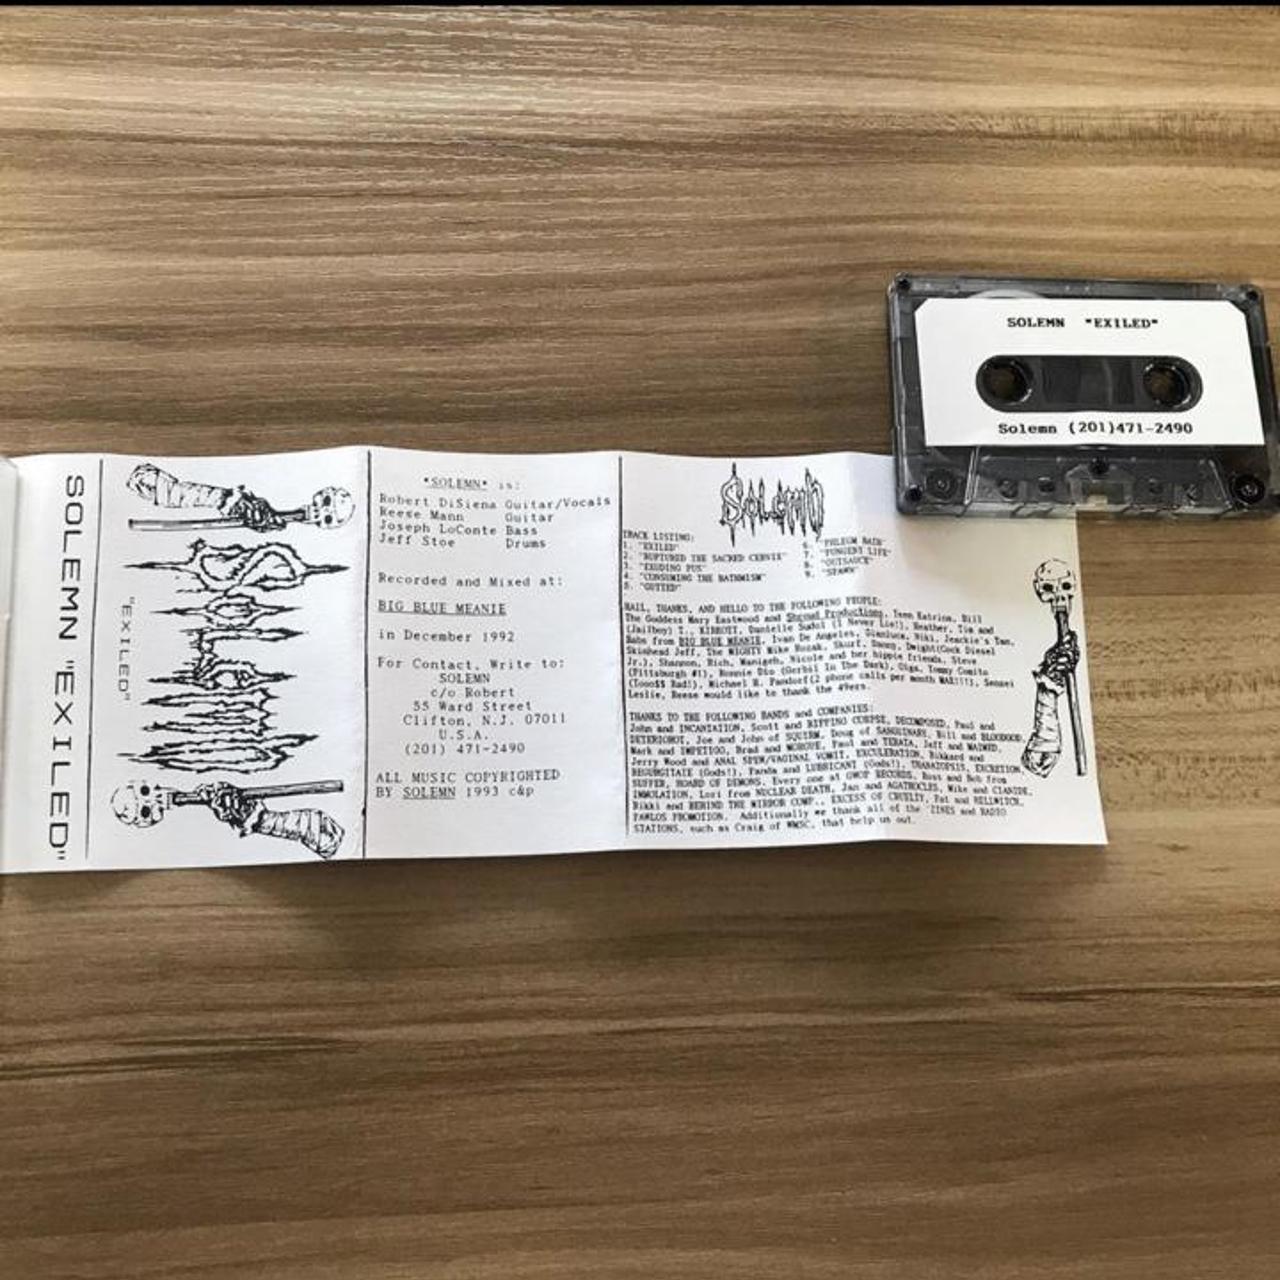 Product Image 4 - Solemn - Exiled demo. 1993